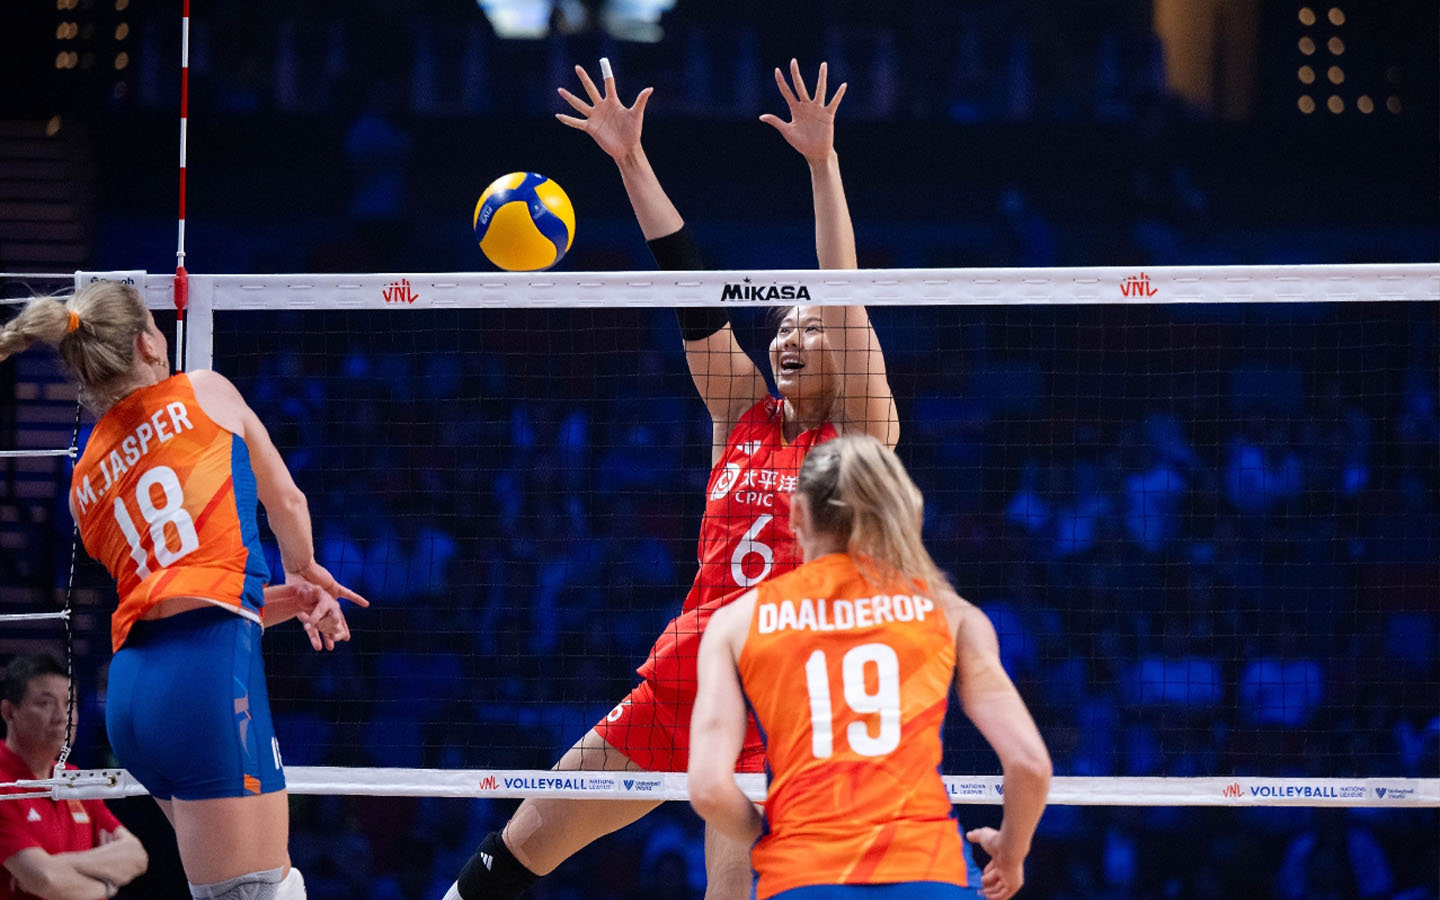 China beats Netherlands in Women’s Volleyball preliminaries at Macao’s Galaxy Arena